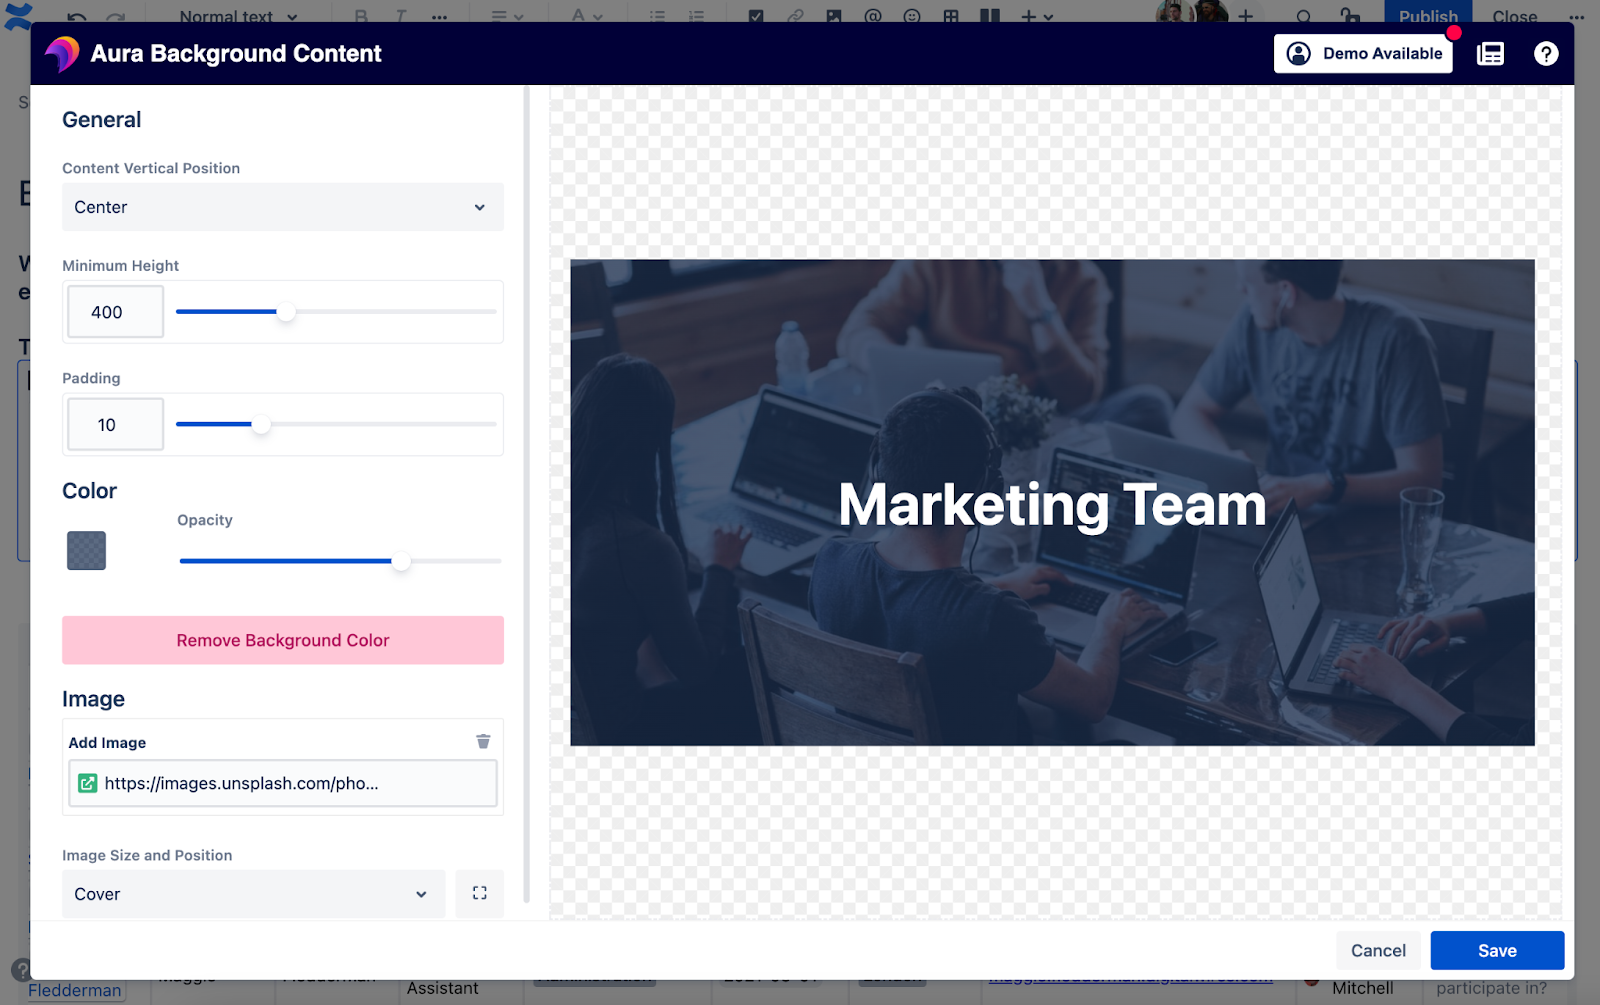 How To Create an Engaging Team Page in Confluence - setting up the Aura Background macro for the Marketing Team space